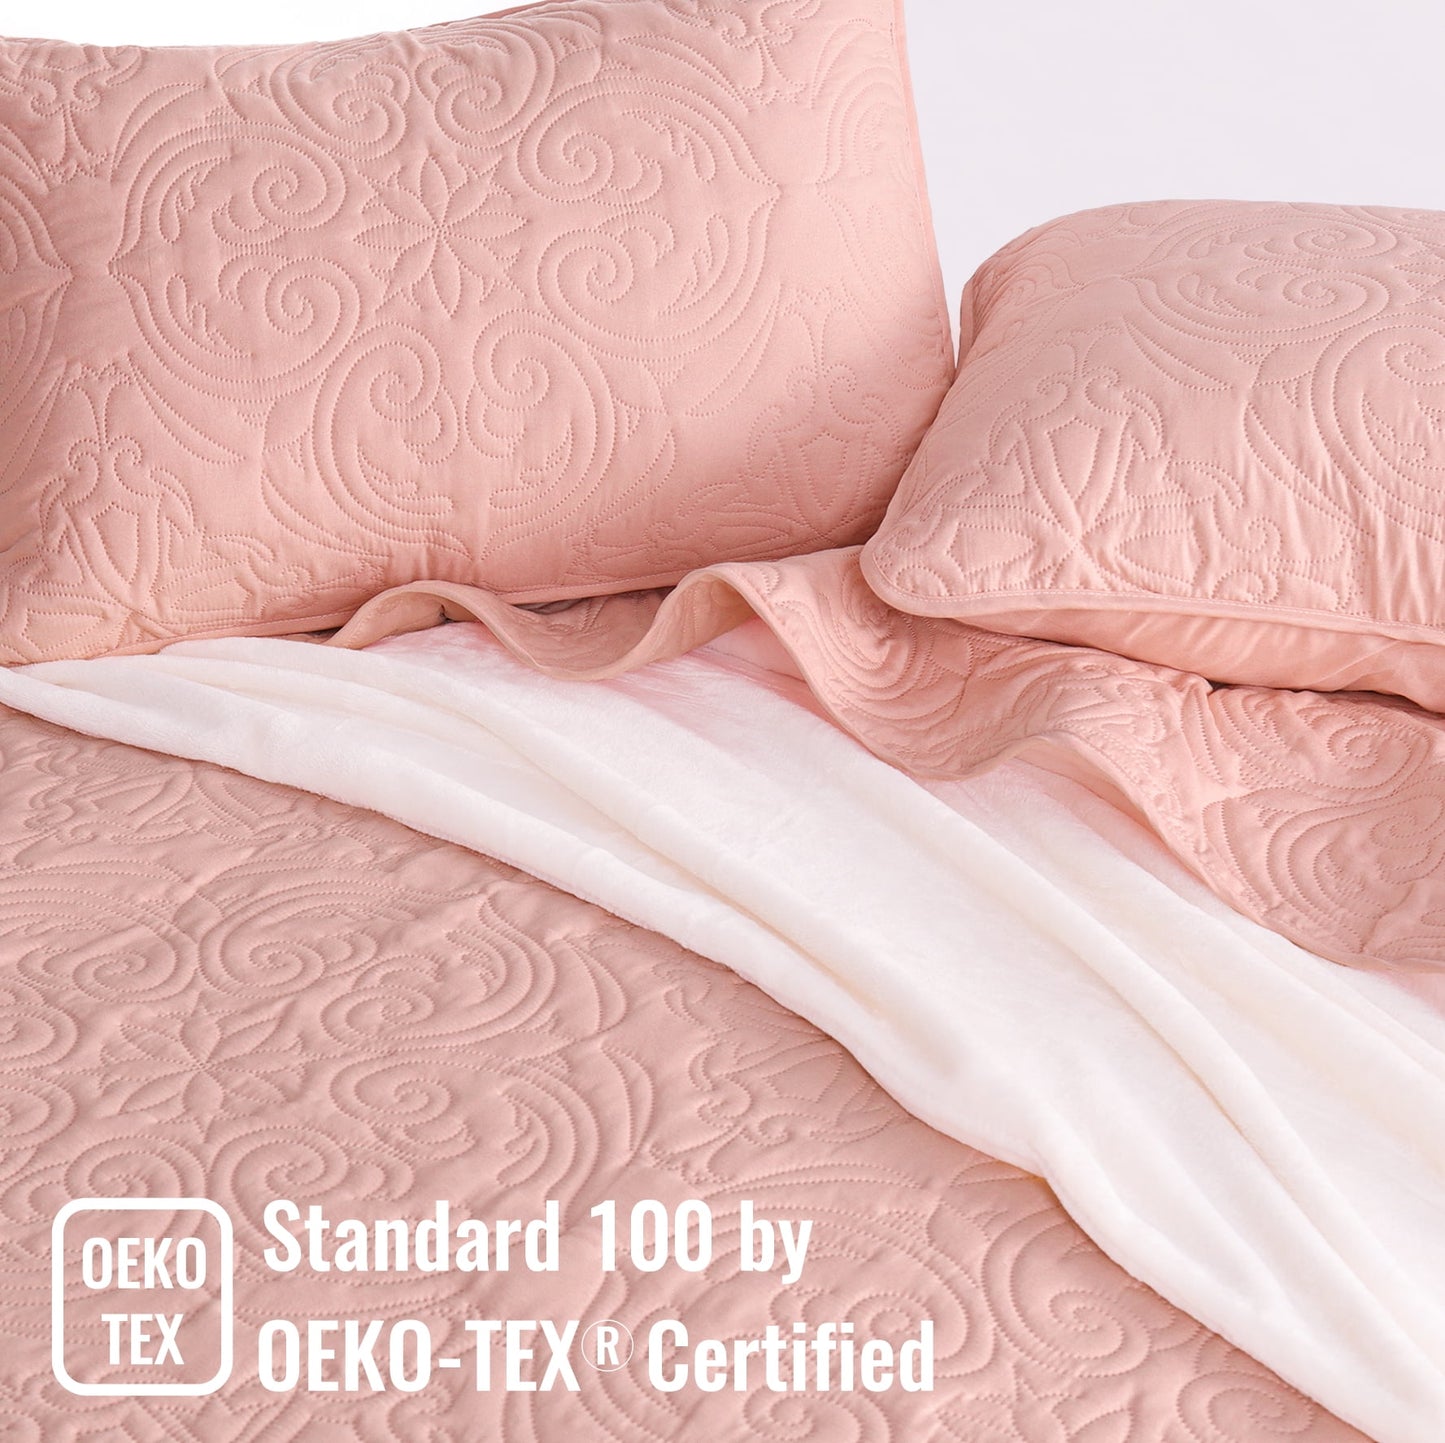 Exclusivo Mezcla Oversized King Quilt Bedding Set, Lightweight Vintage California Cal King Size Quilts with Pillow Shams, Soft Bedspreads Coverlets for All Seasons, (112"x104", Blush Pink)